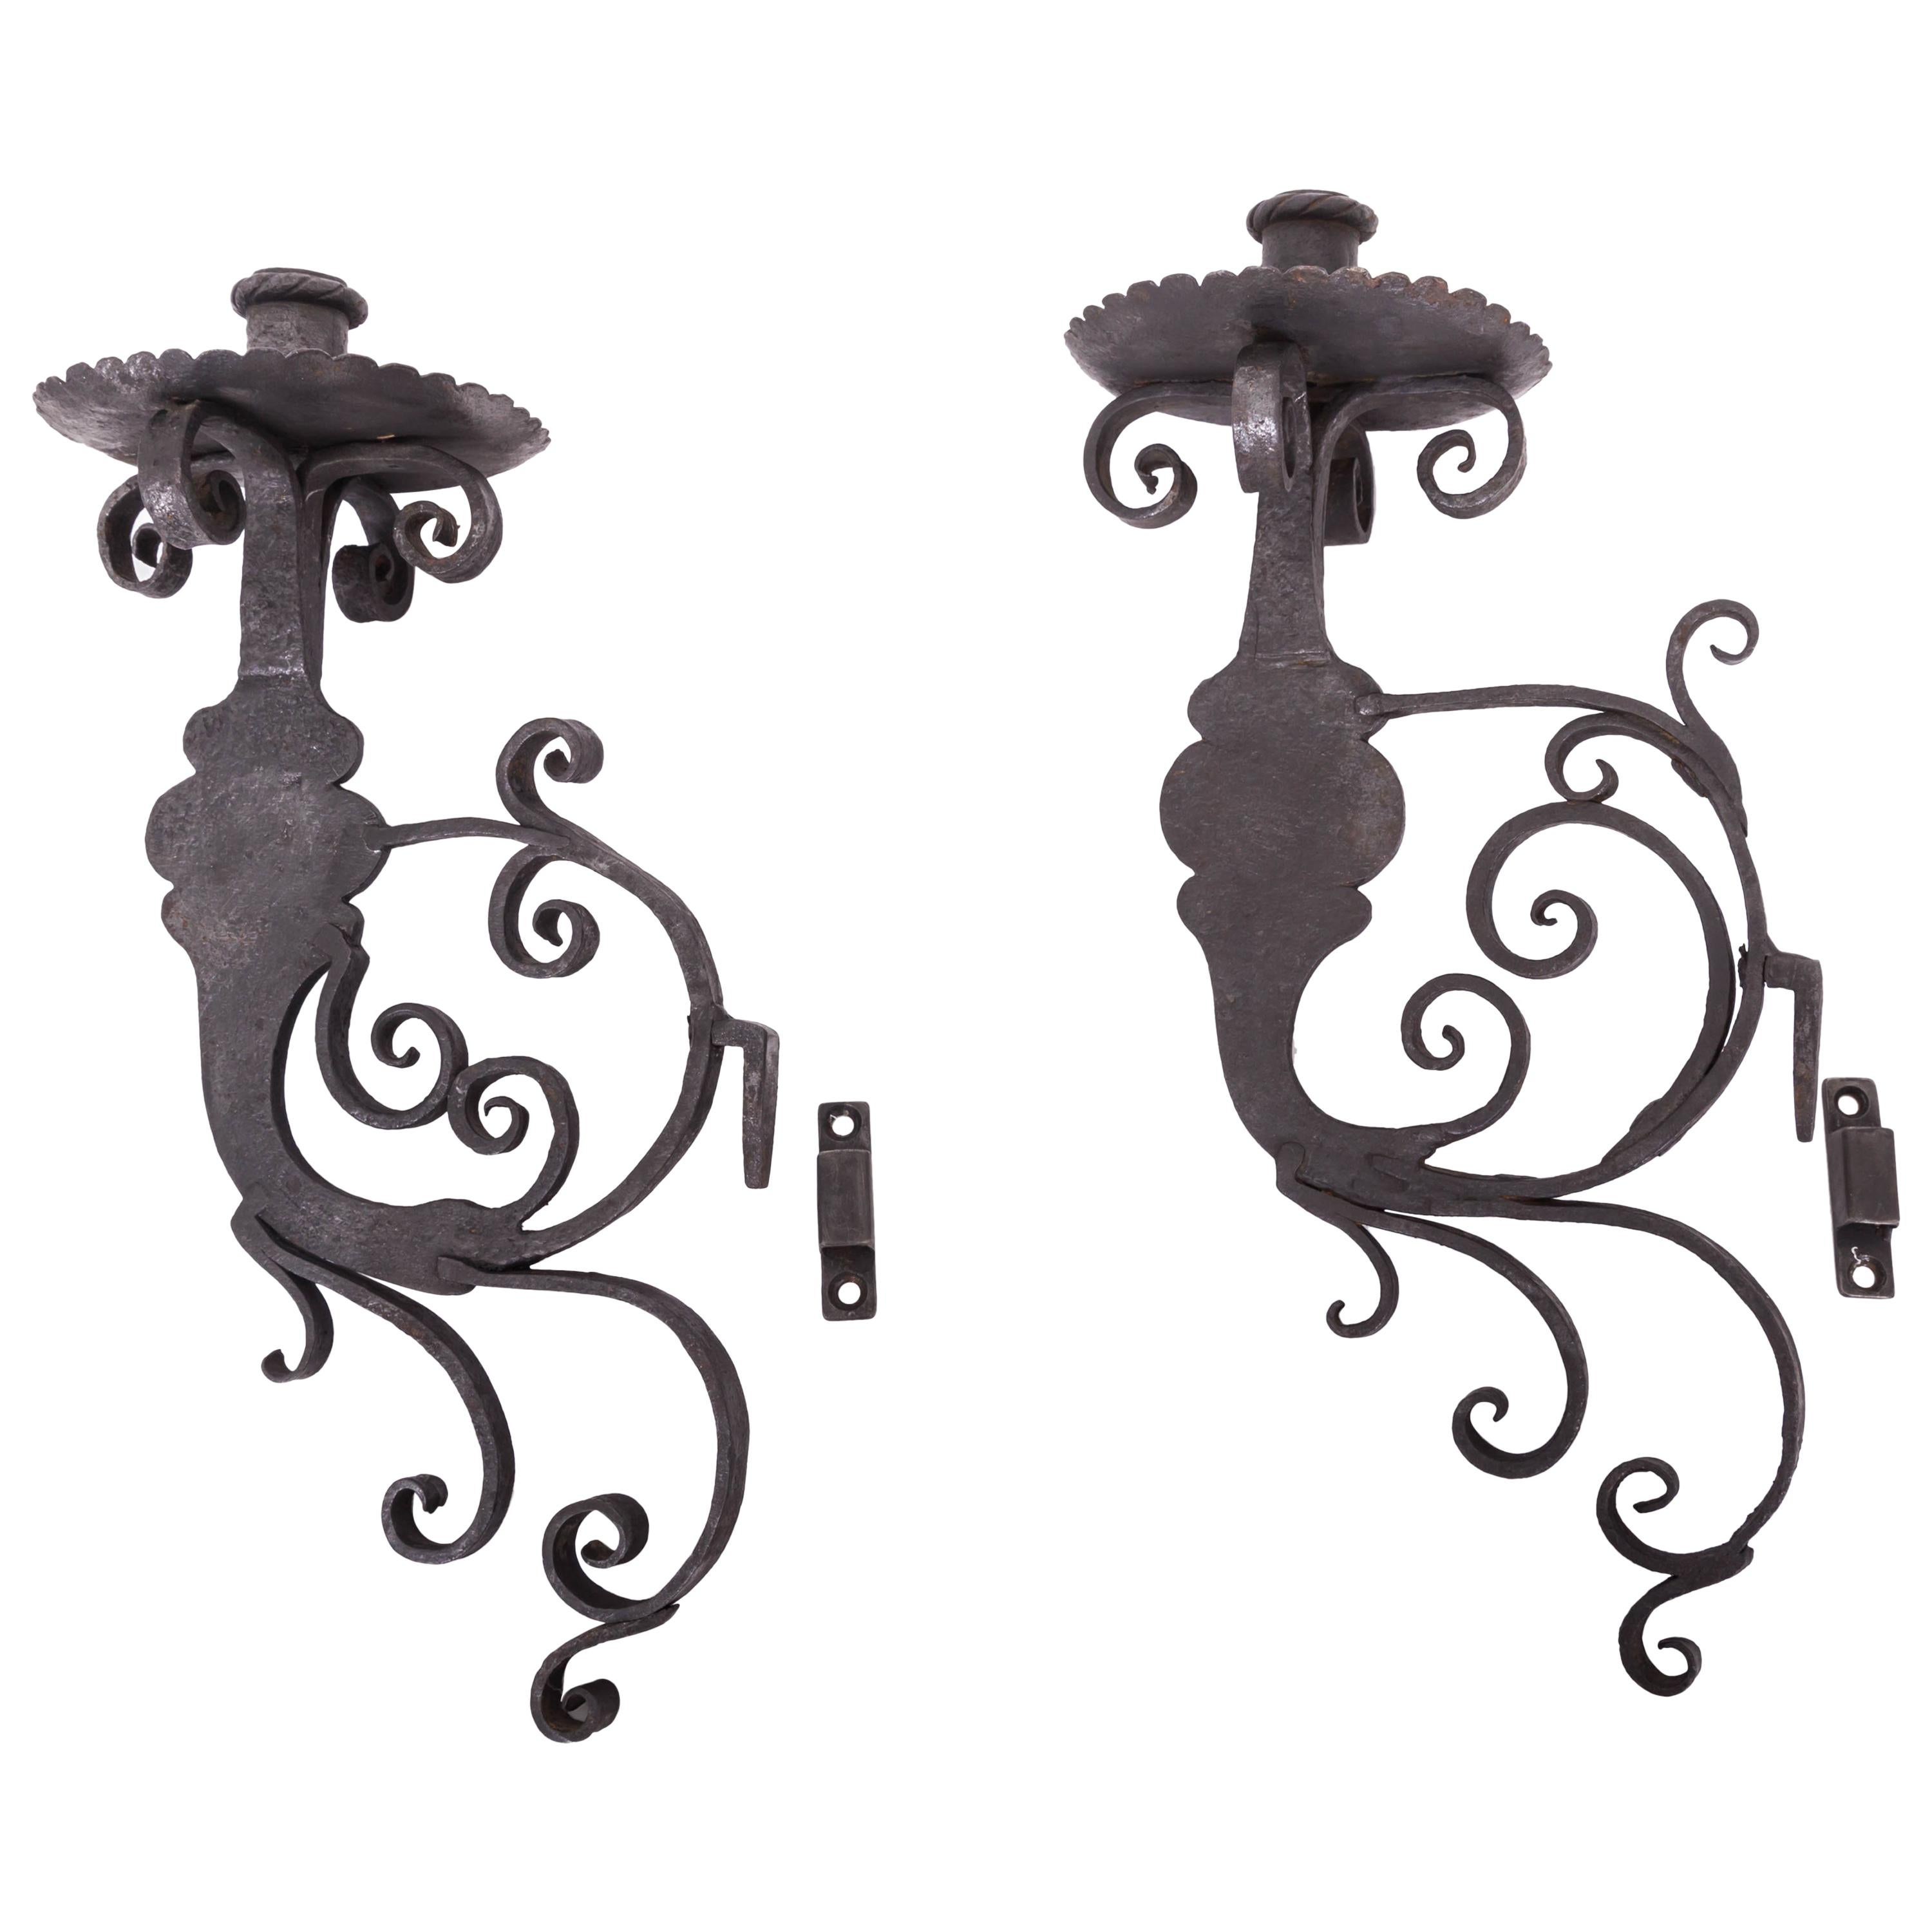 Pair of 17th Century European Hand-Forged Iron Wall Candle Sconces